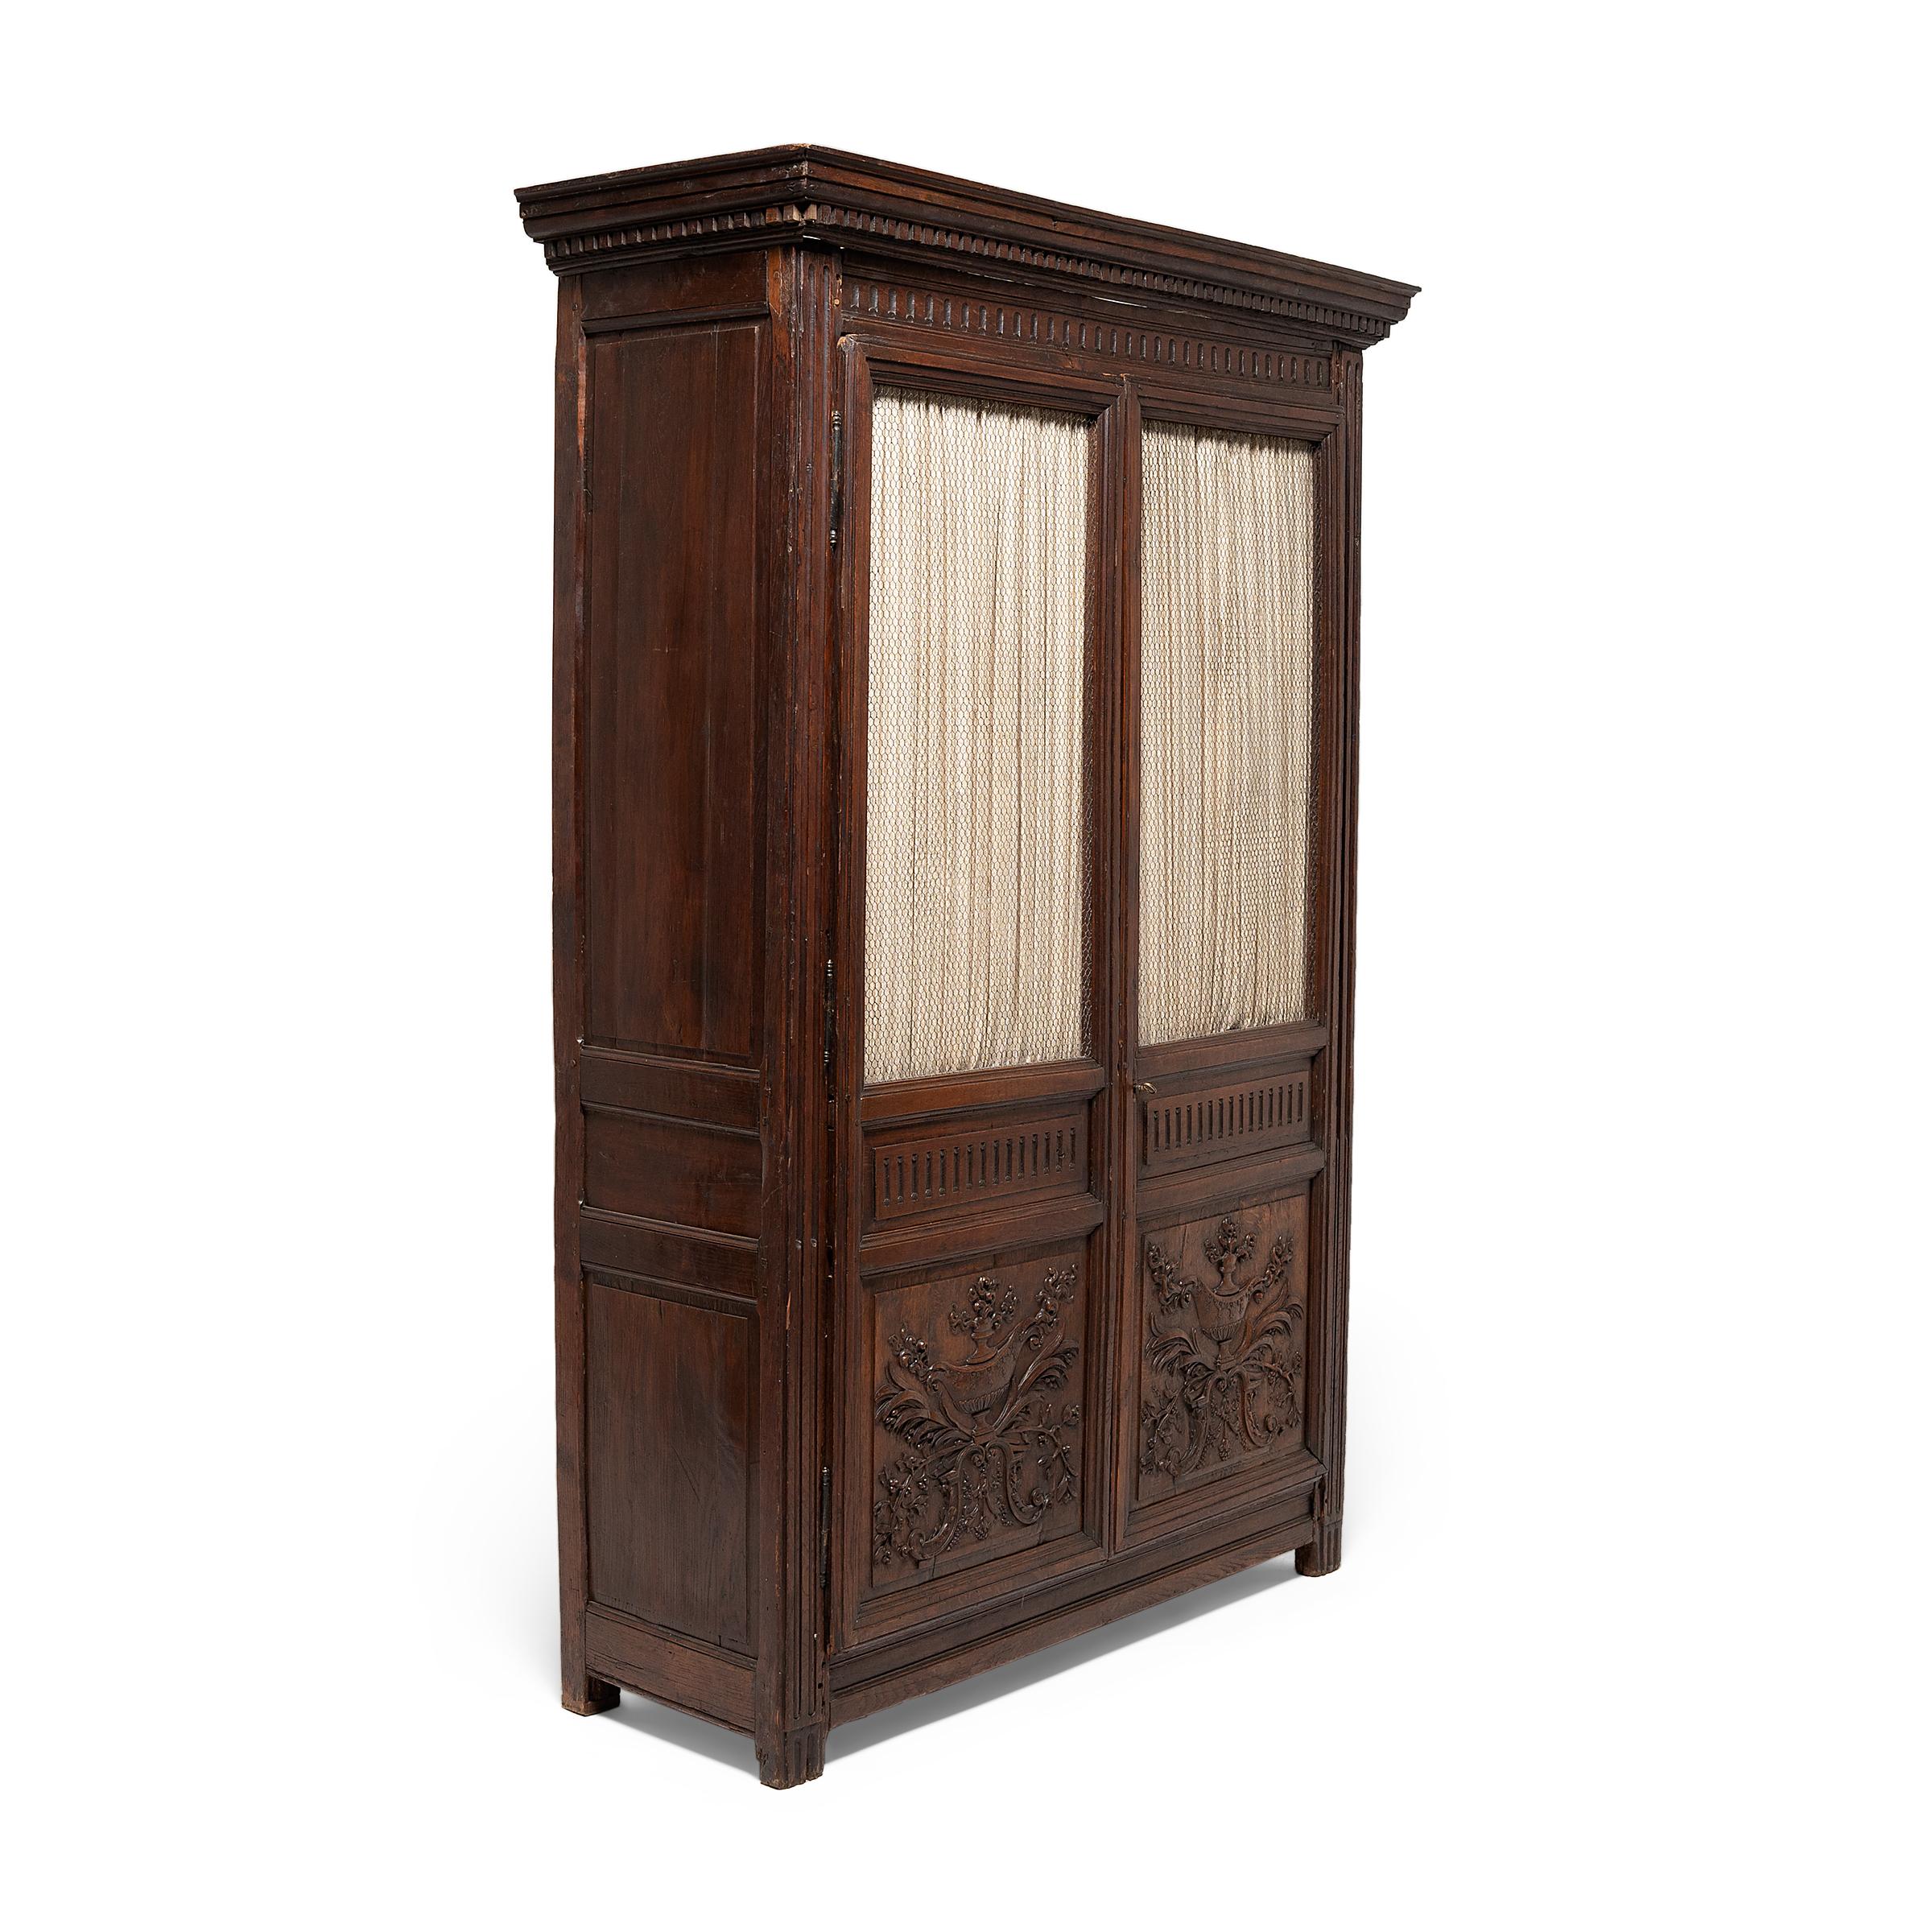 French Grand Renaissance Revival Armoire with Wire Screens, circa 1800 For Sale